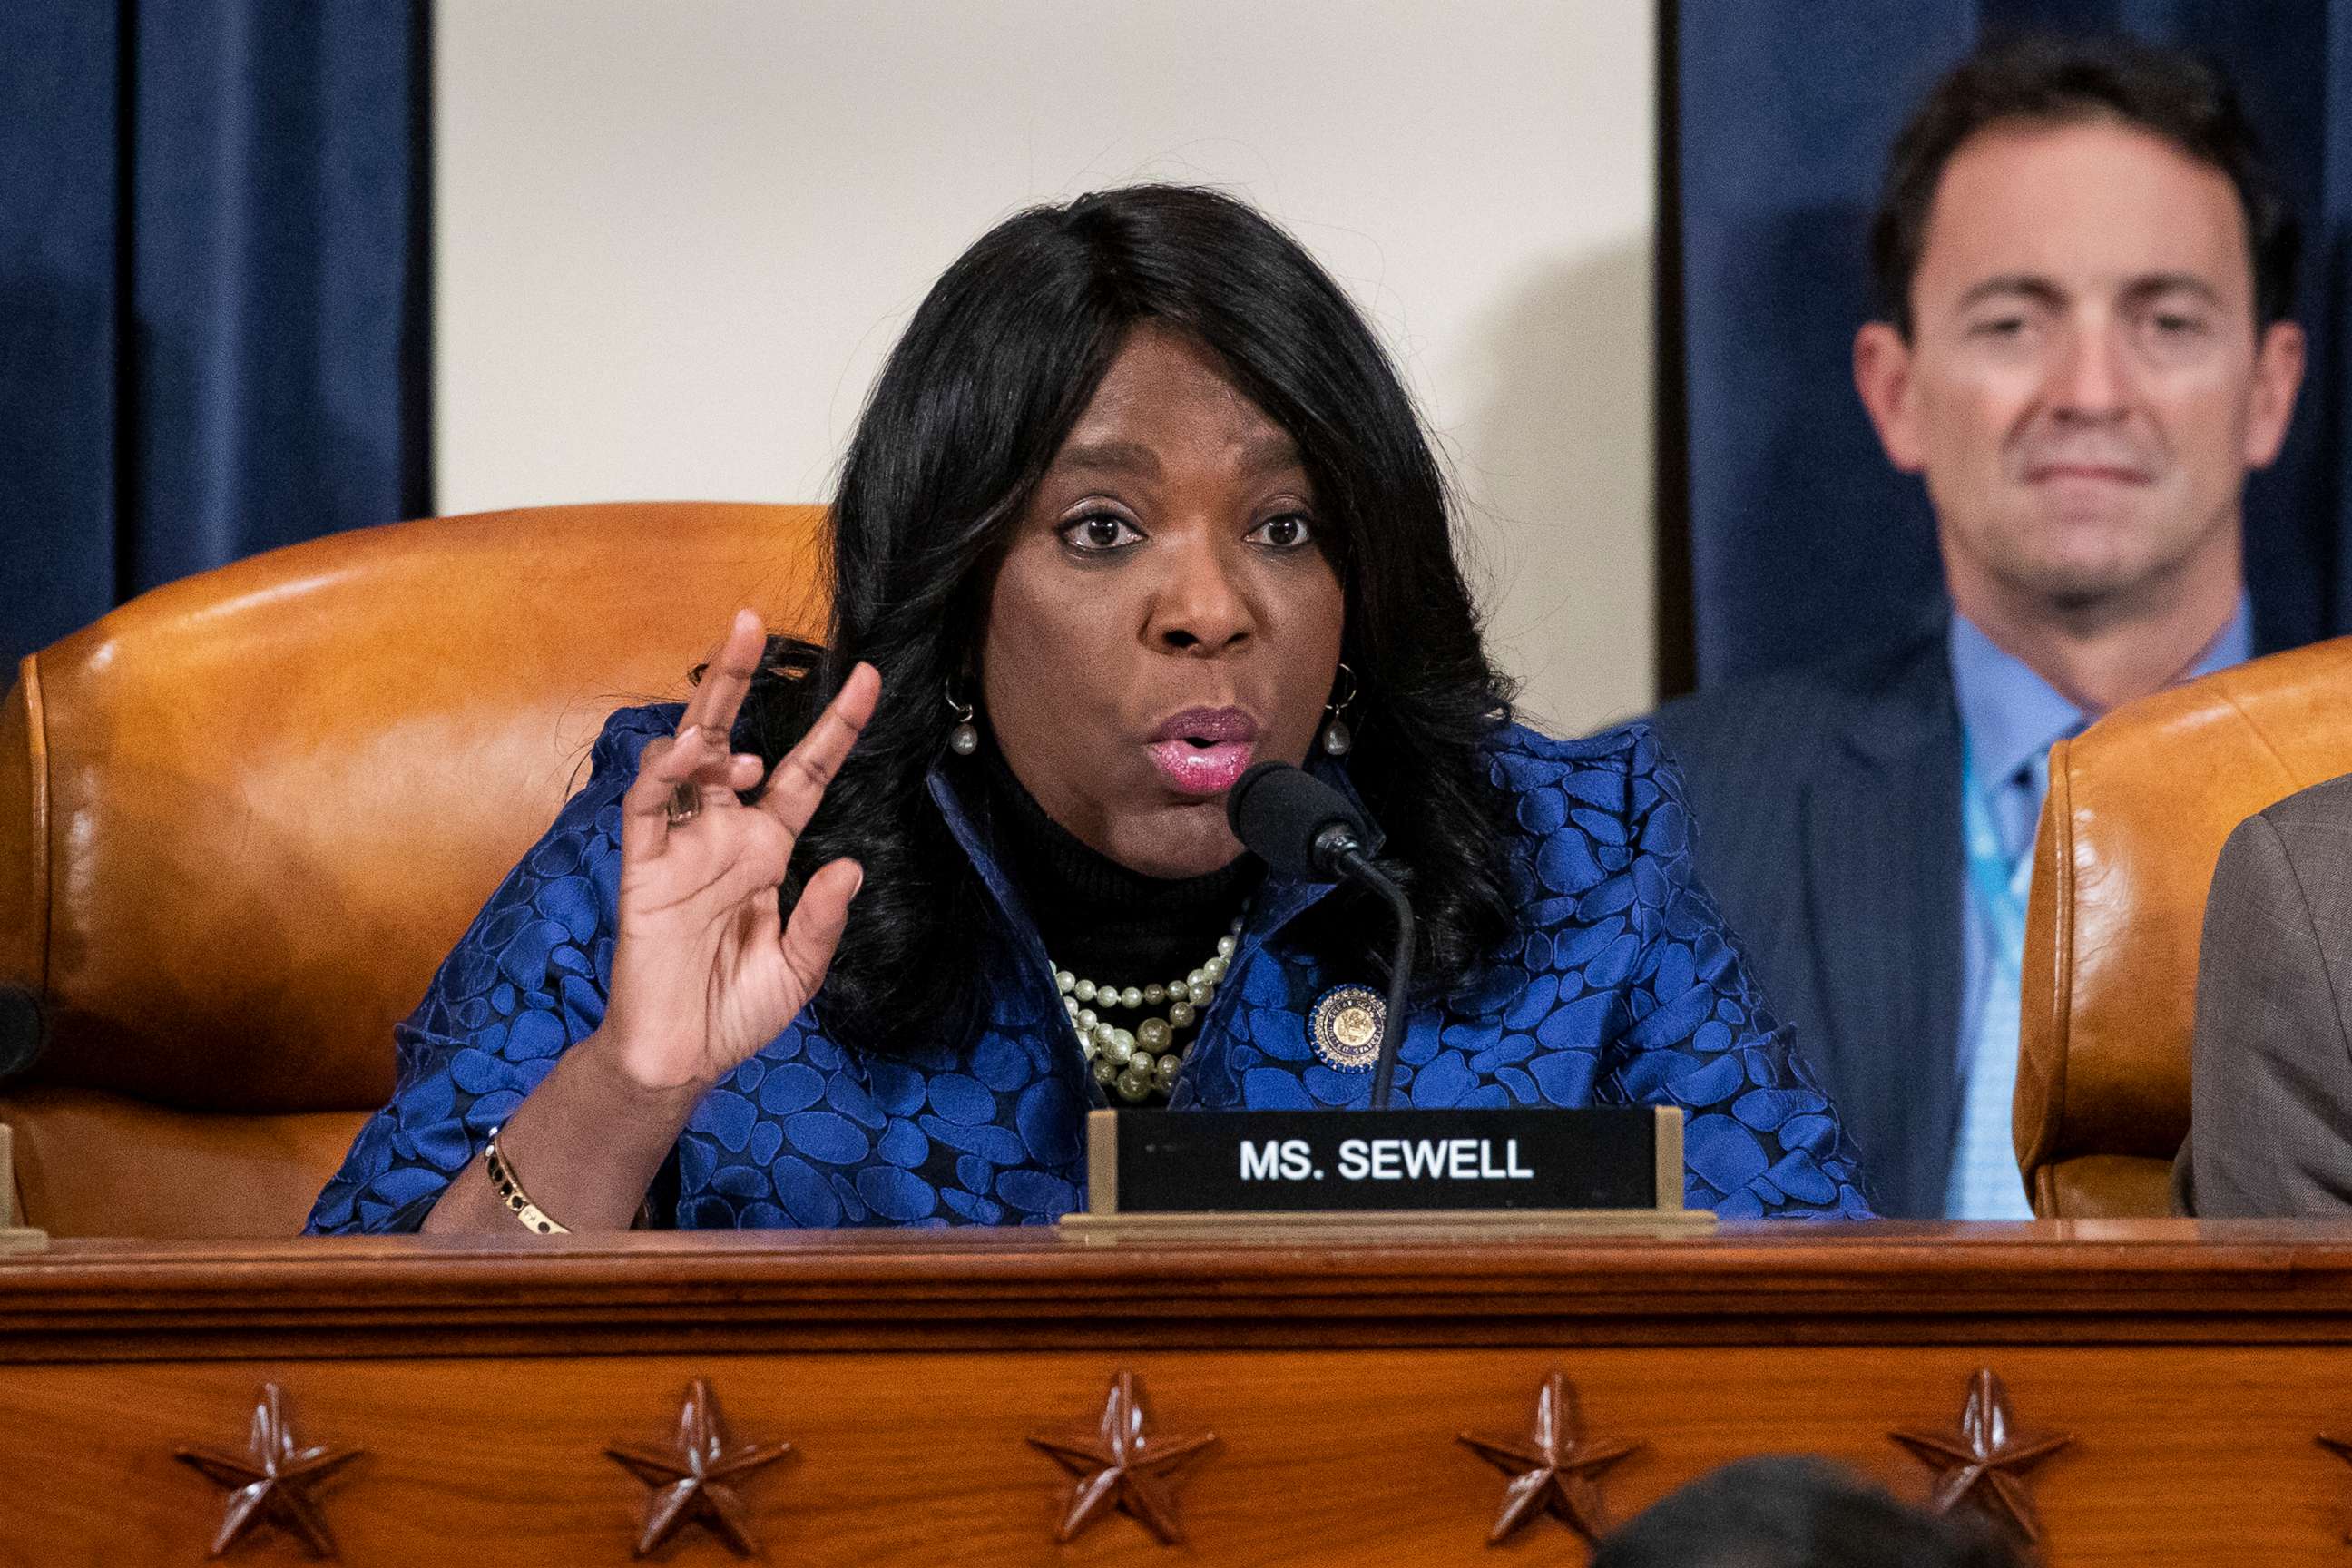 PHOTO: Rep. Terri Sewell ask a question during the impeachment inquiry before the House Intelligence Committee on Capitol Hill, Nov. 20, 2019 in Washington, D.C.